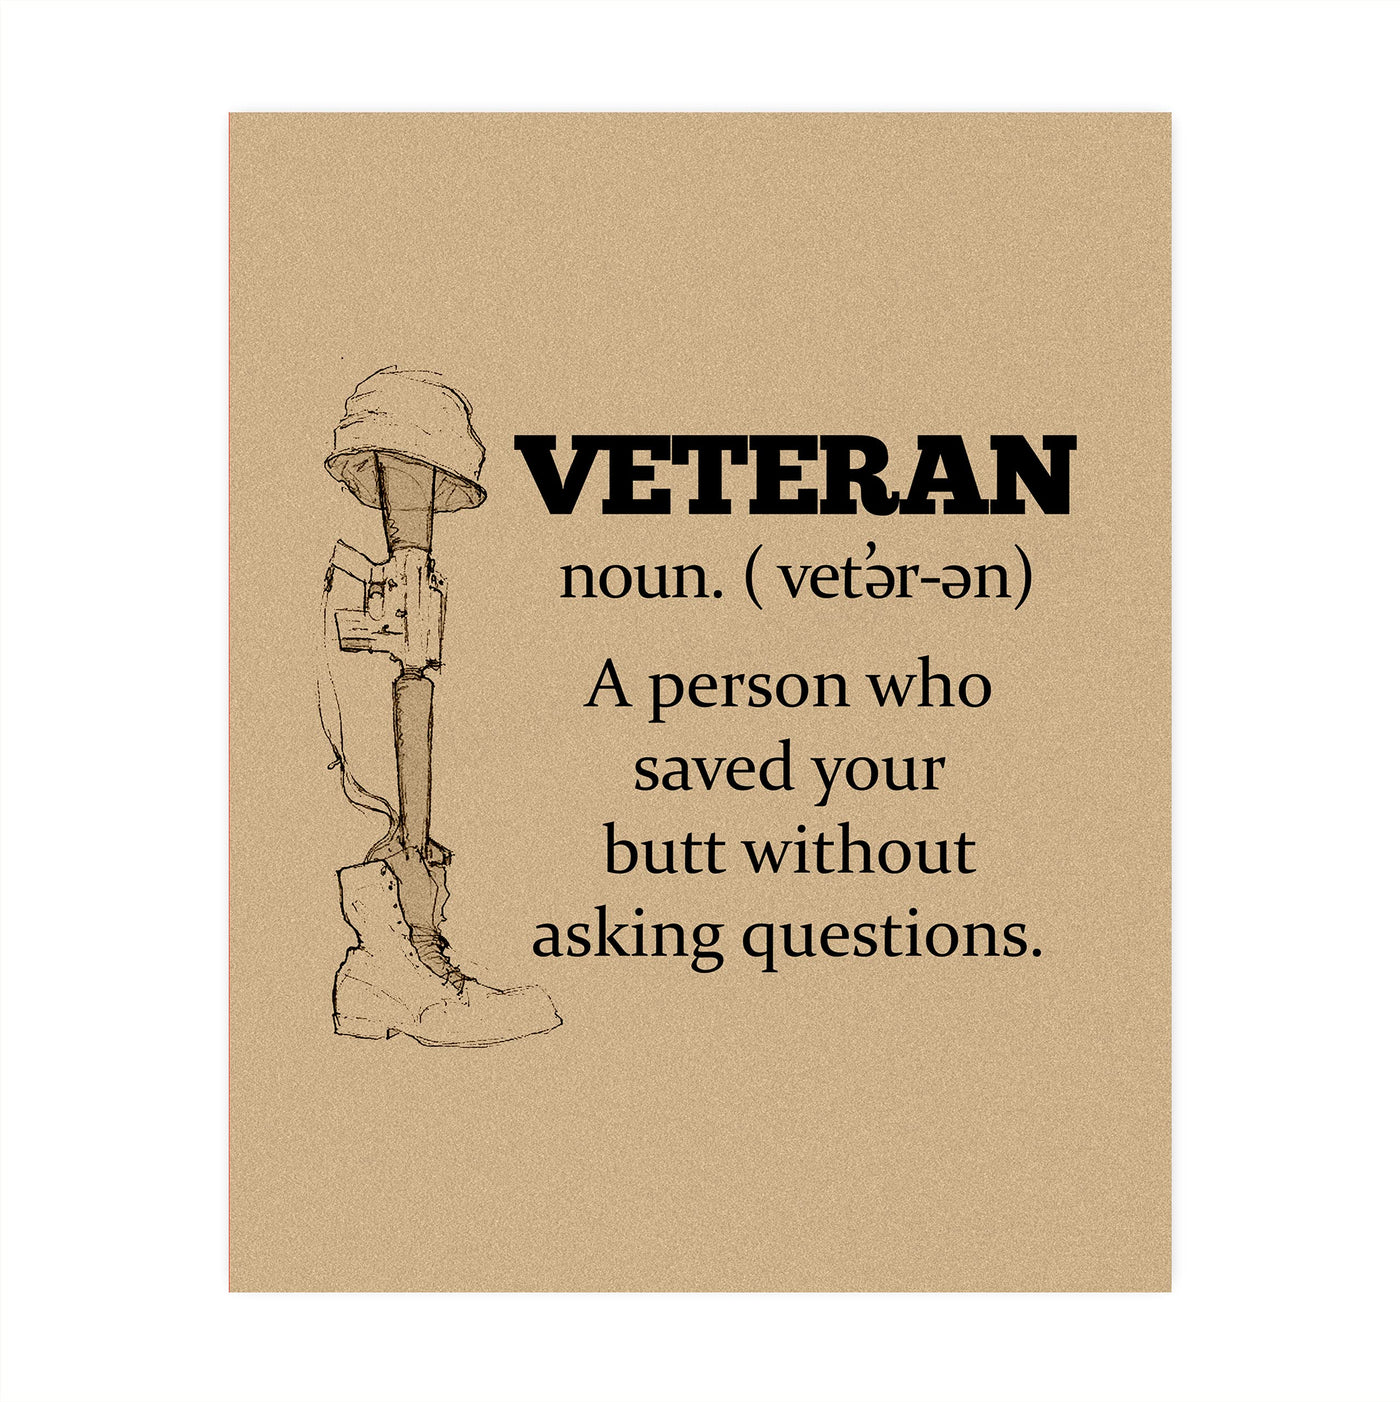 Veteran-Person Who Saved Your Butt Without Asking Questions-Patriotic Wall Art-8x10" USA Military Print-Ready to Frame. Home-Office-Cave-Shop-American Decor. Show Your Gratitude For Our Veterans!